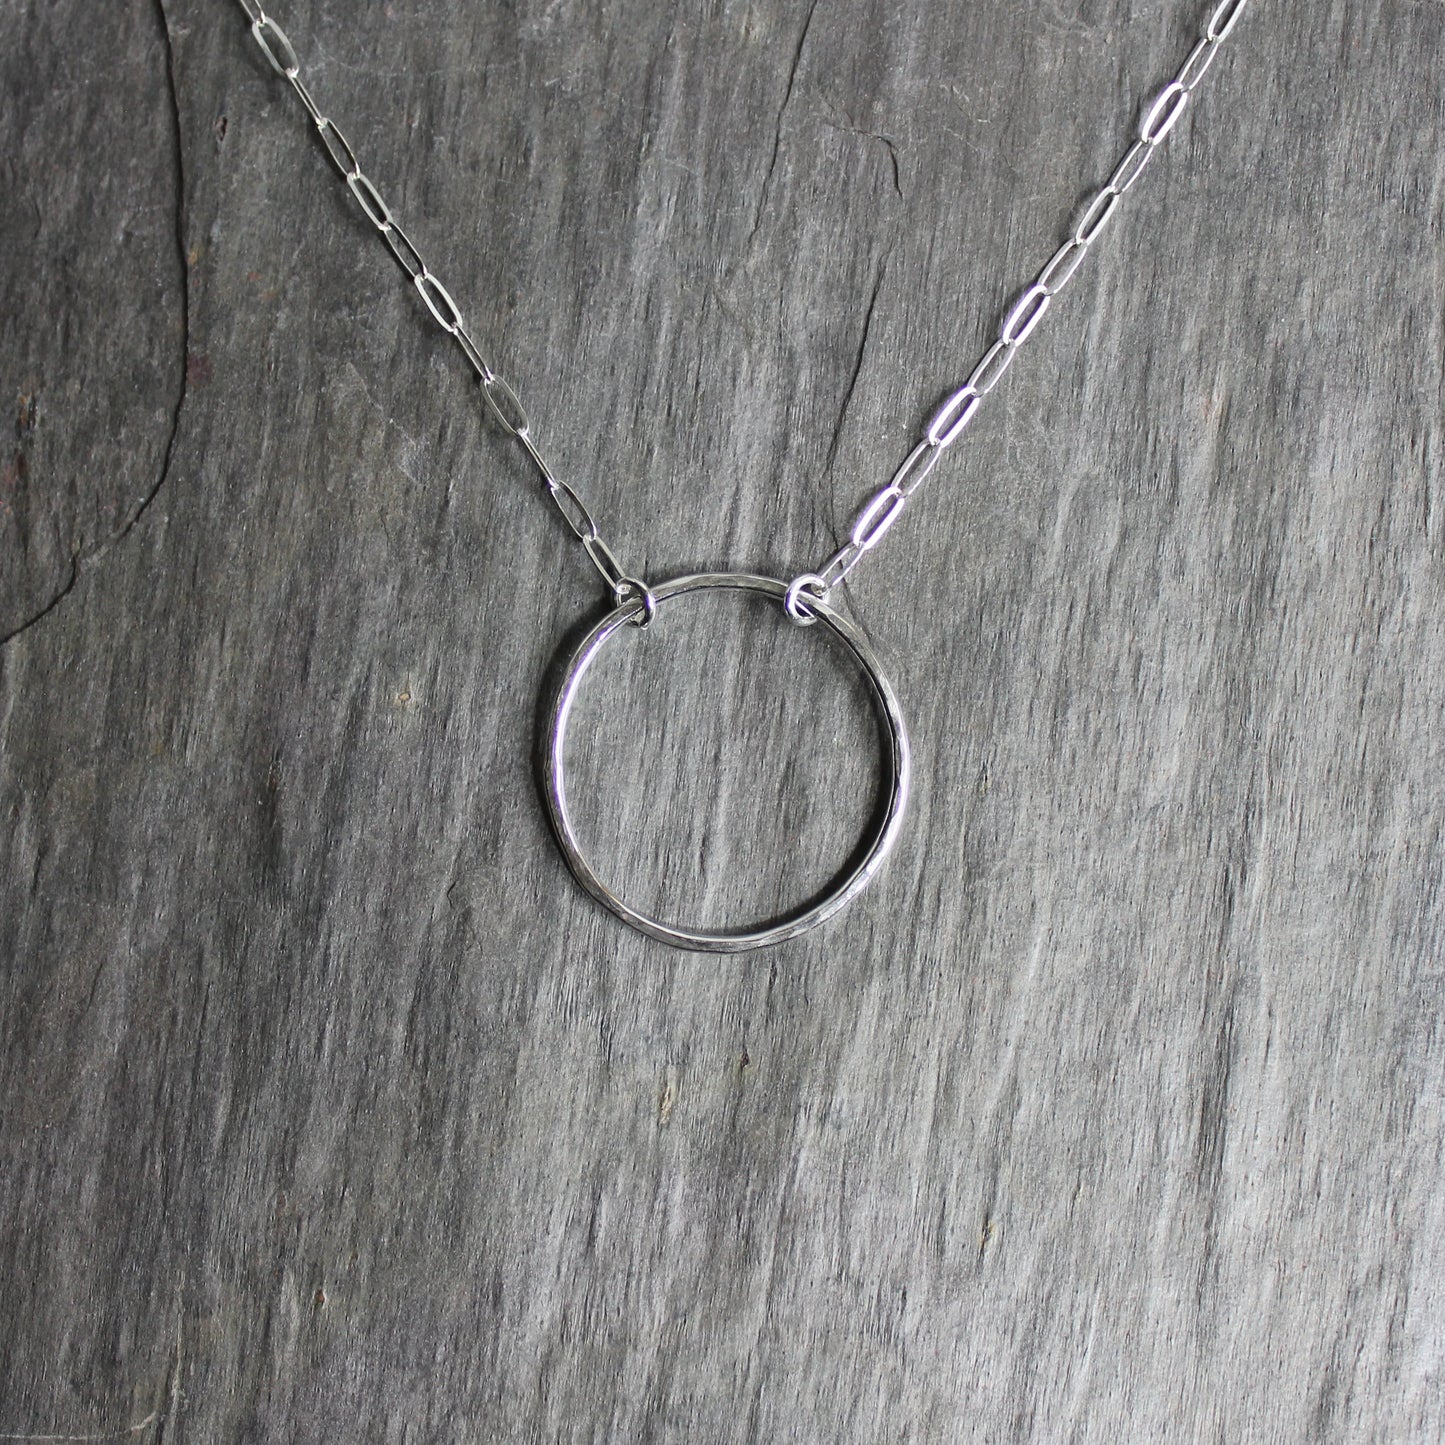 A 1 inch diameter sterling silver hammered circle attached to sterling silver chain to make an elegantly simple necklace.